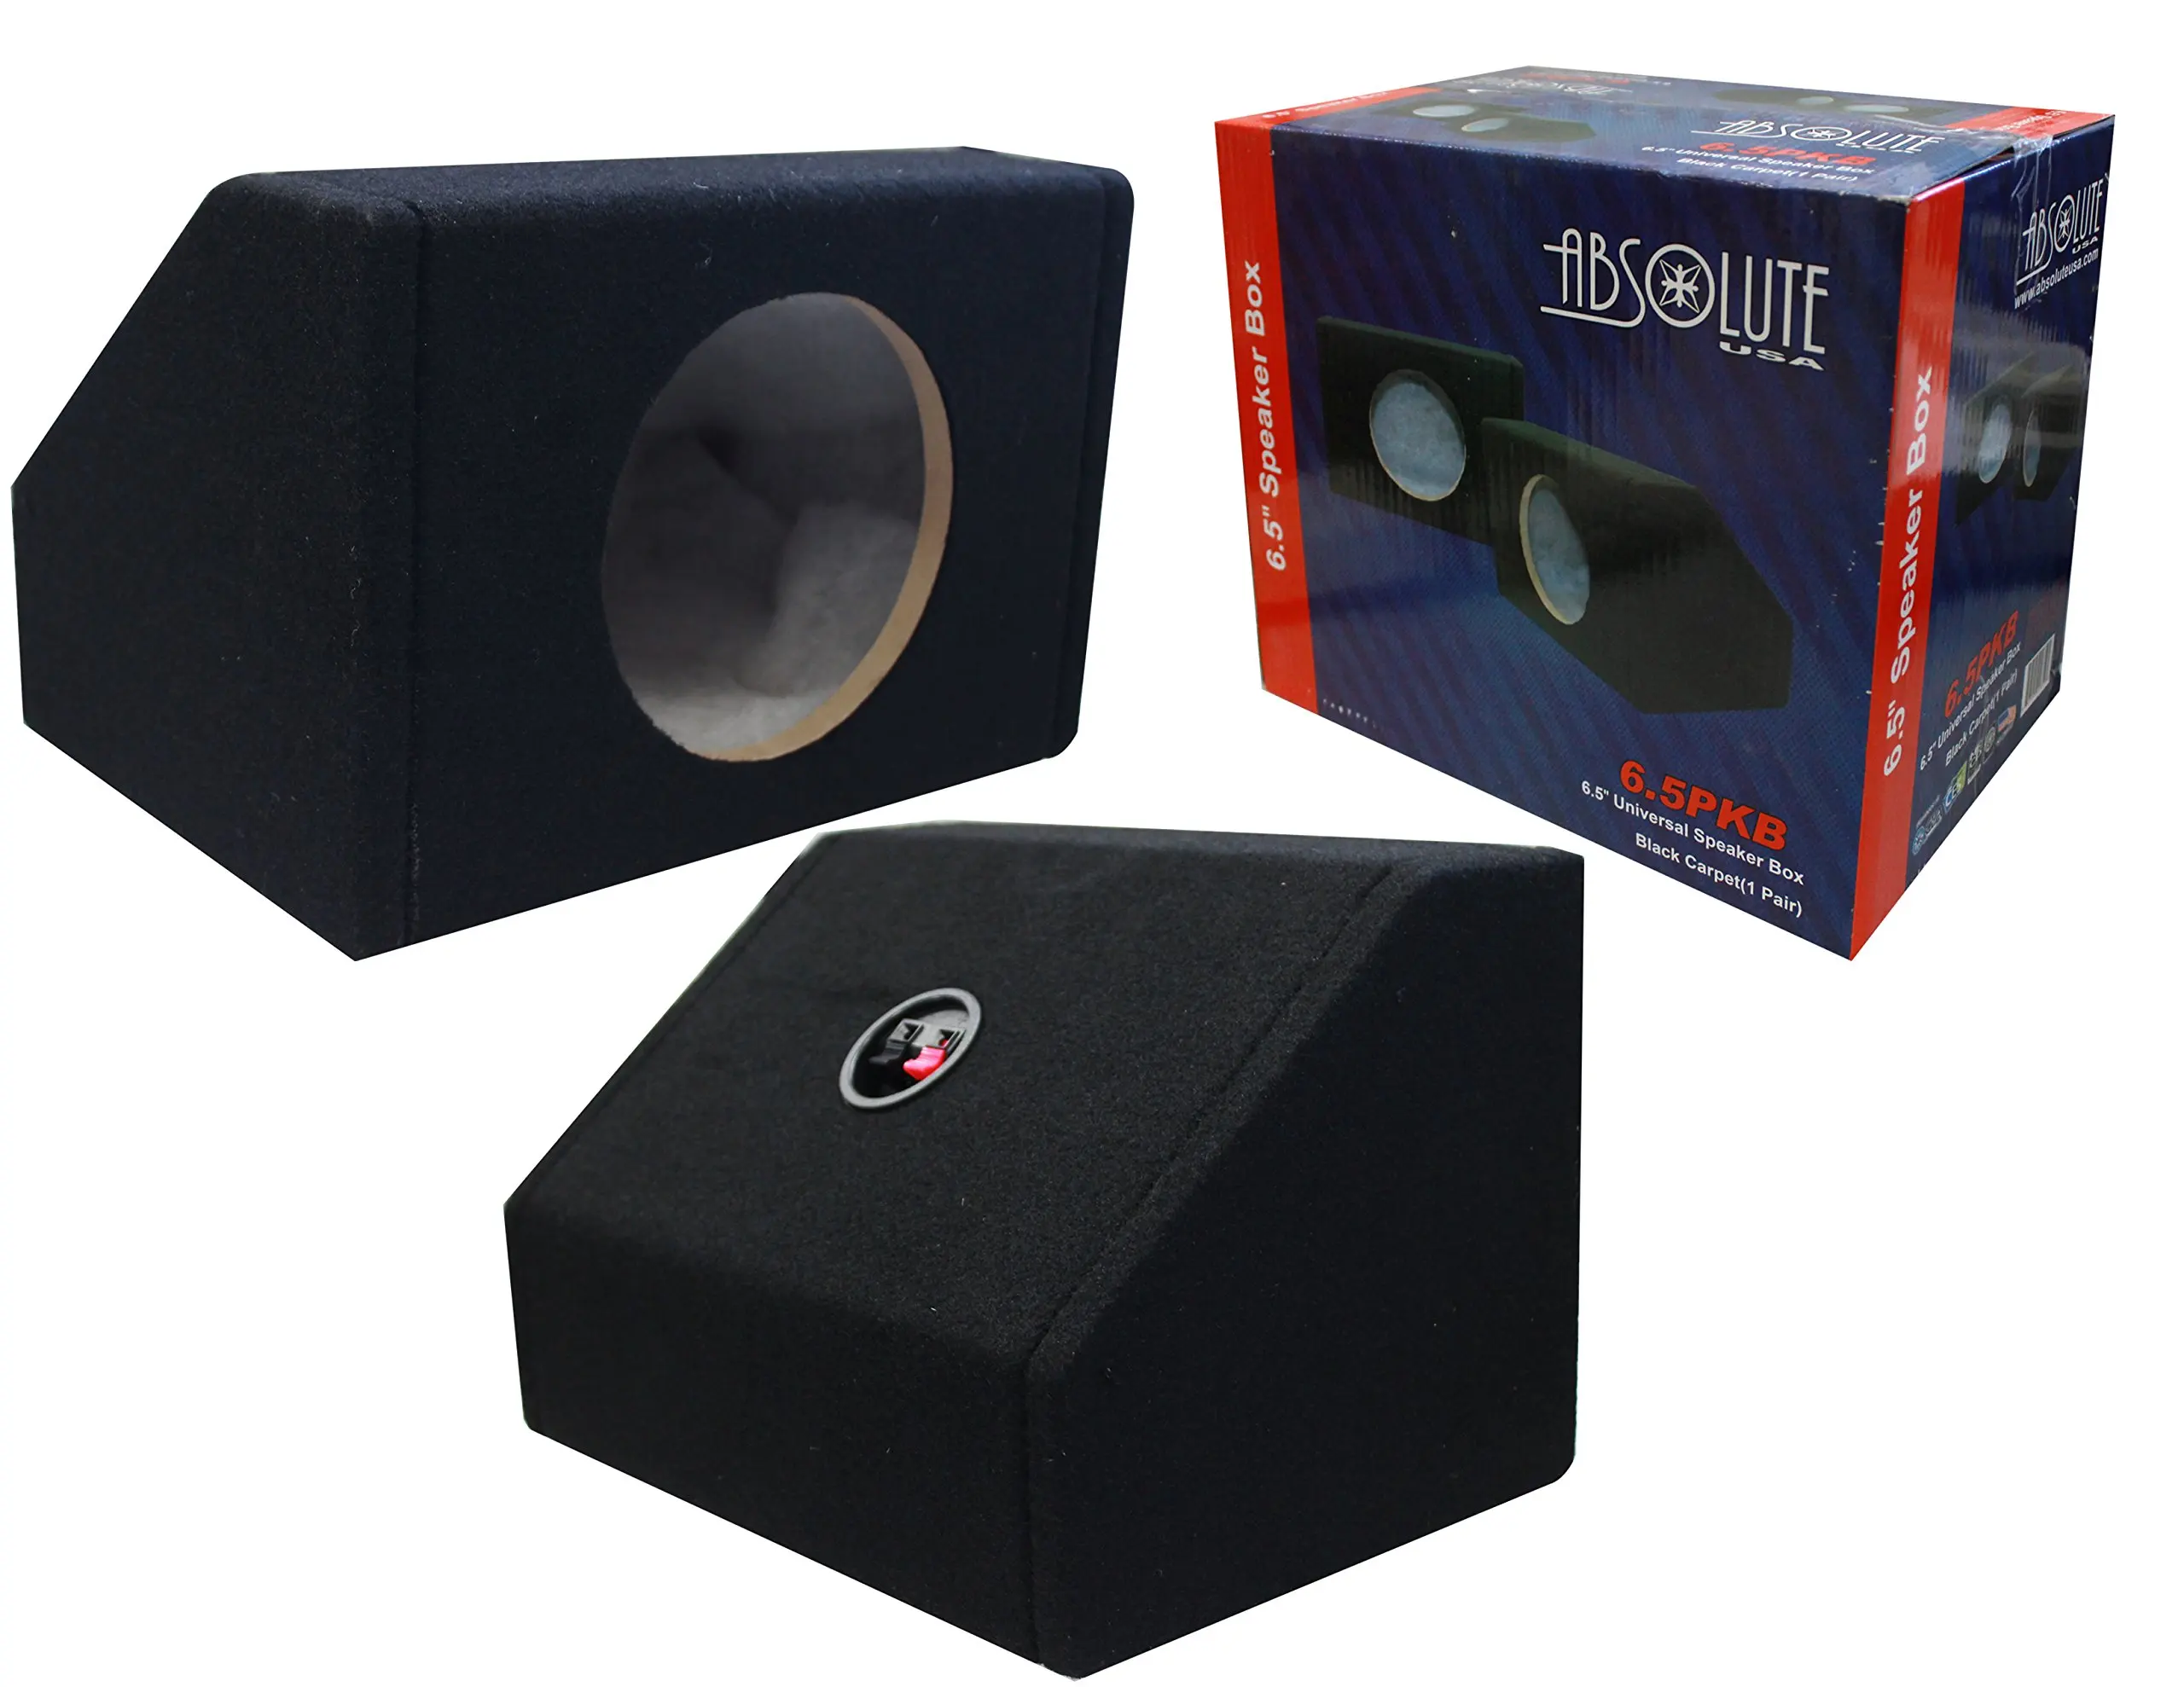 30.91. Absolute USA 6.5PKB 6.5" Angled/Wedge Box Speakers, Set of Two ...